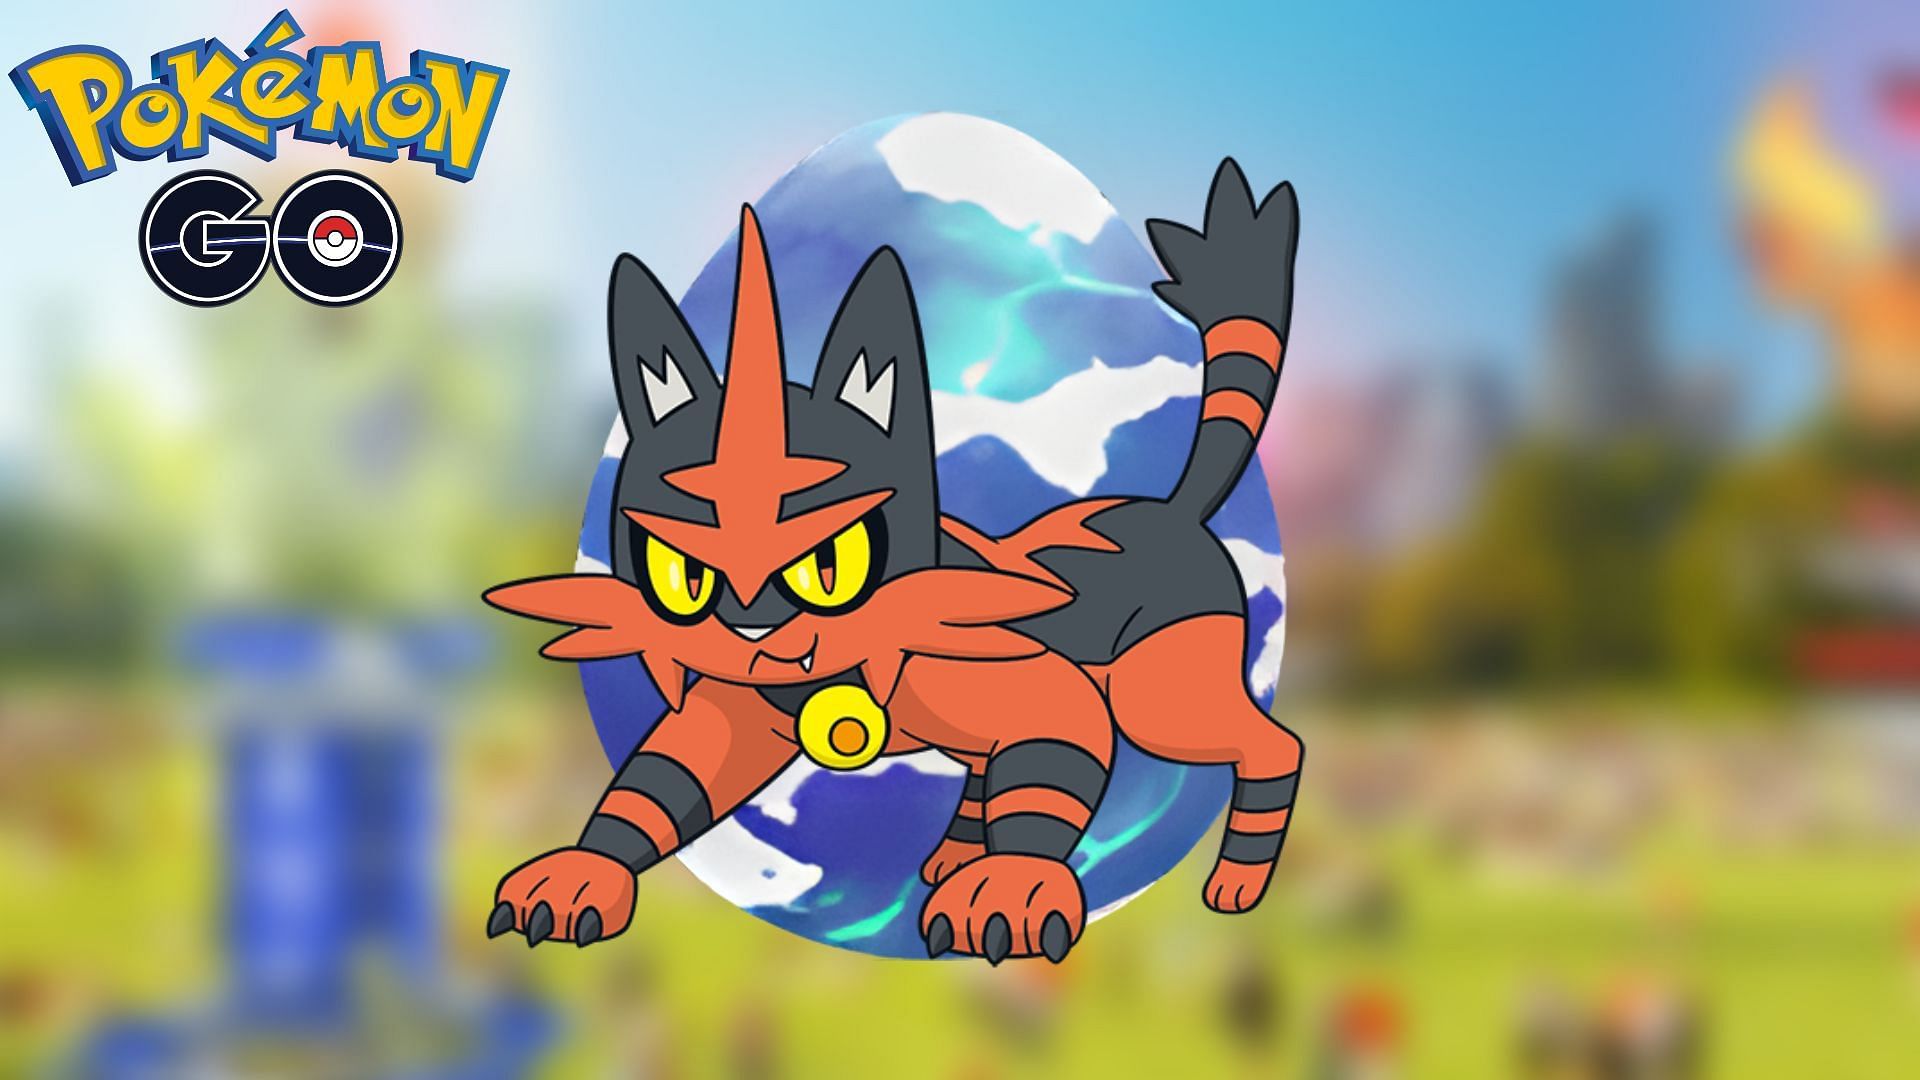 Pokemon GO Torracat raid guide: Weaknesses and best counters